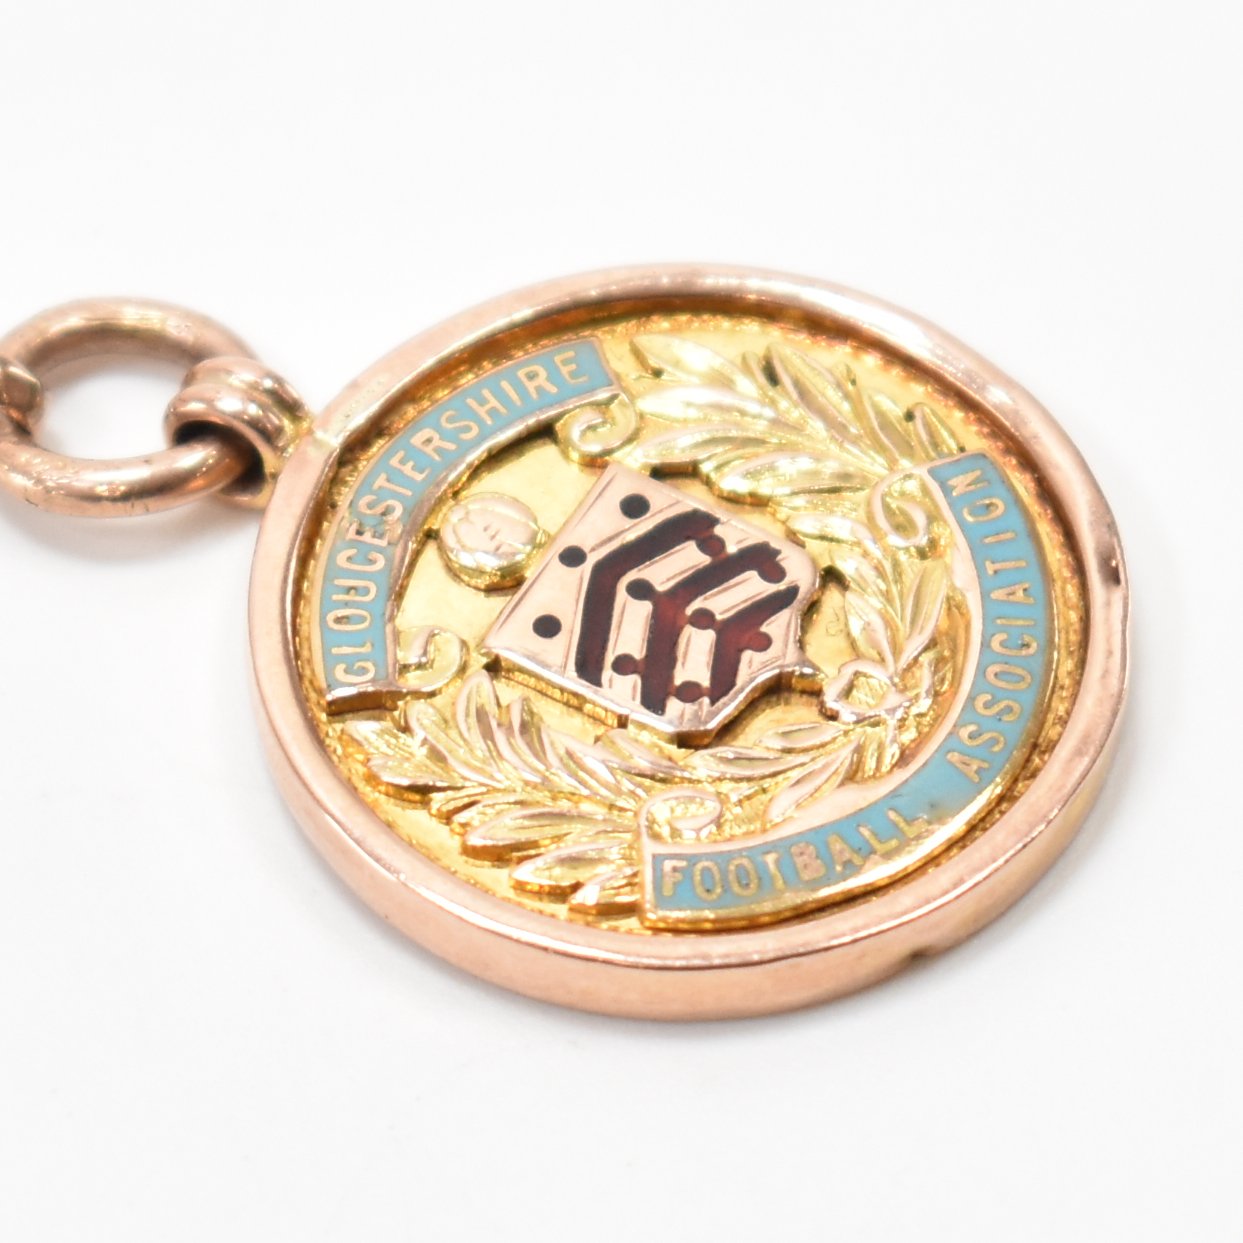 1920S 9CT GOLD POCKET WATCH CHAIN & MEDAL - Image 2 of 6